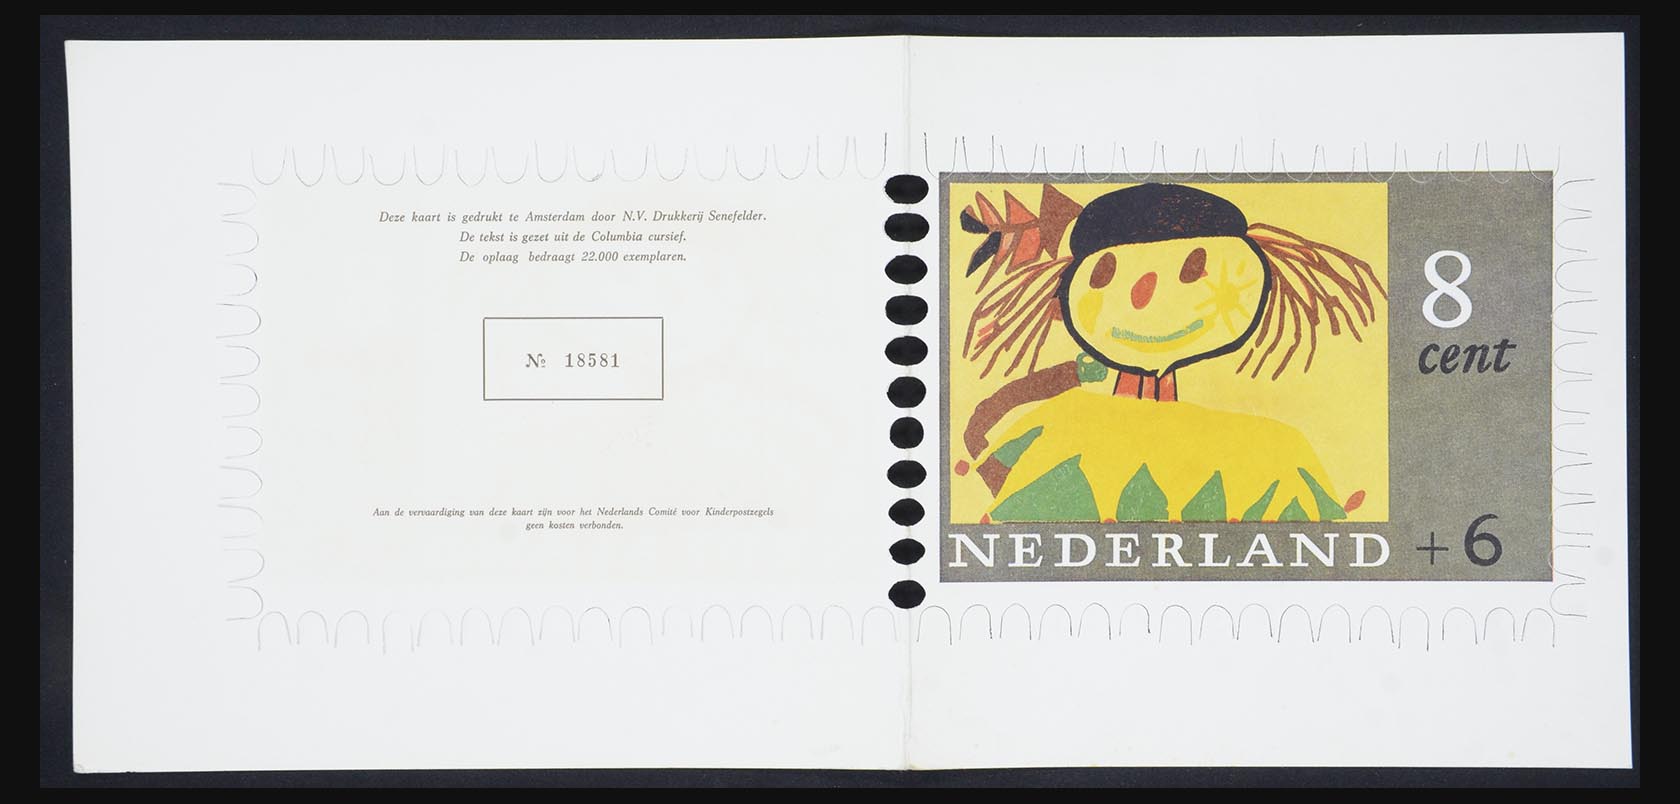 32327 003 - 32327 Netherlands child charity compliment card 1965.